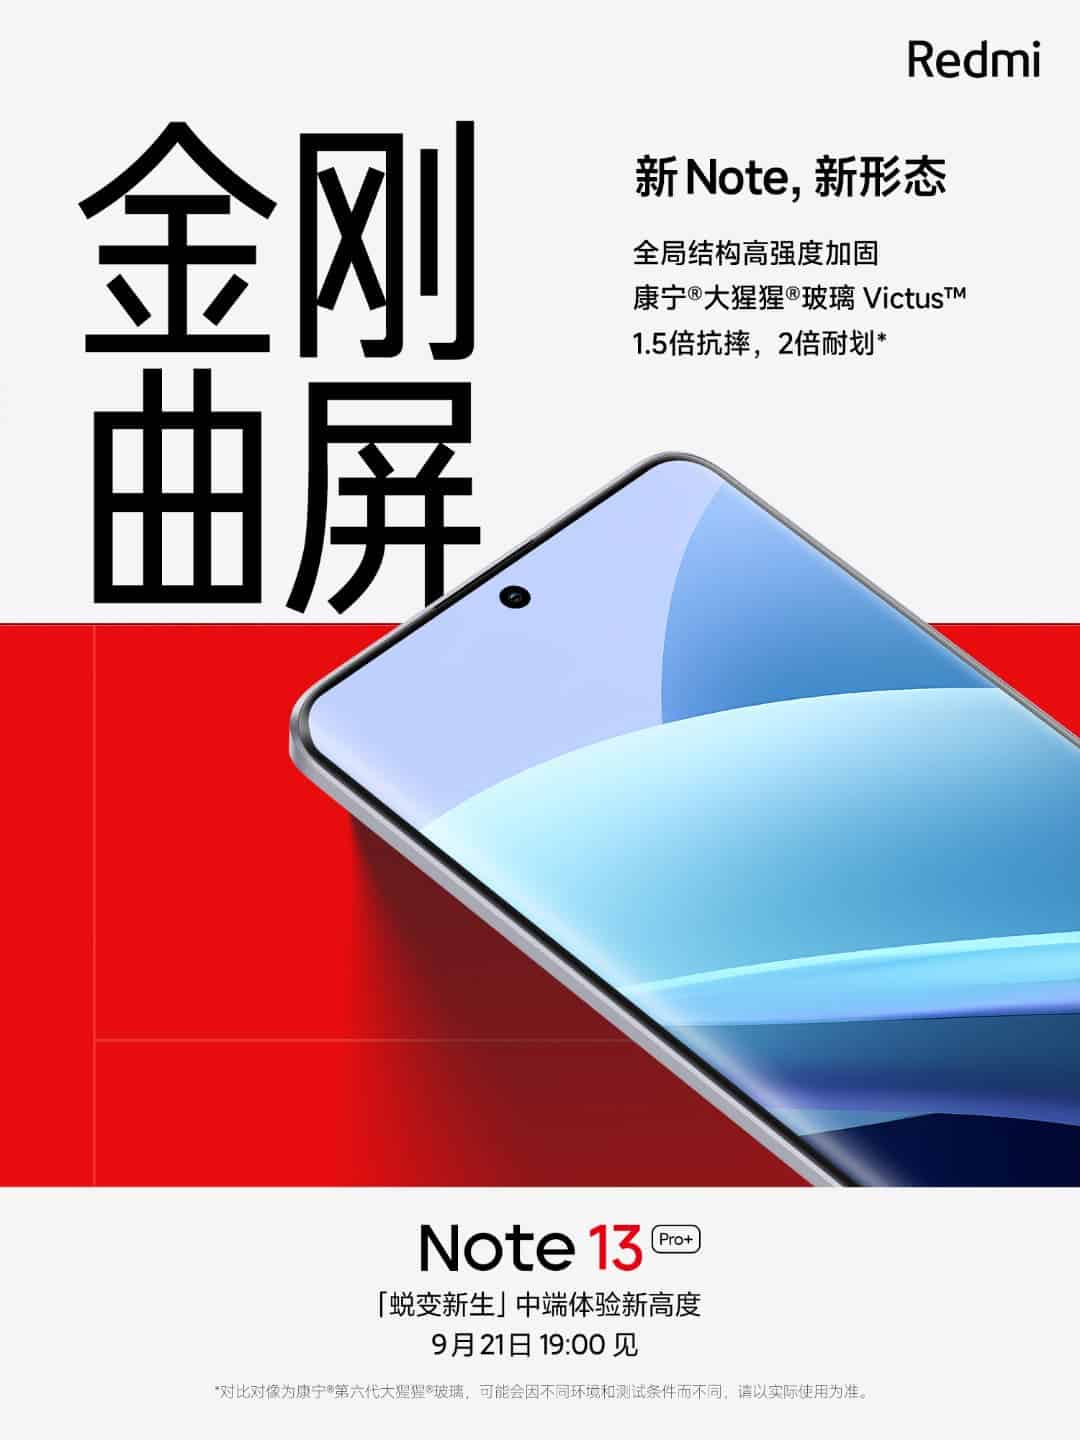 Xiaomi Redmi Note 13 Pro Plus launches with hardware improvements while  maintaining mid-range price tag -  News